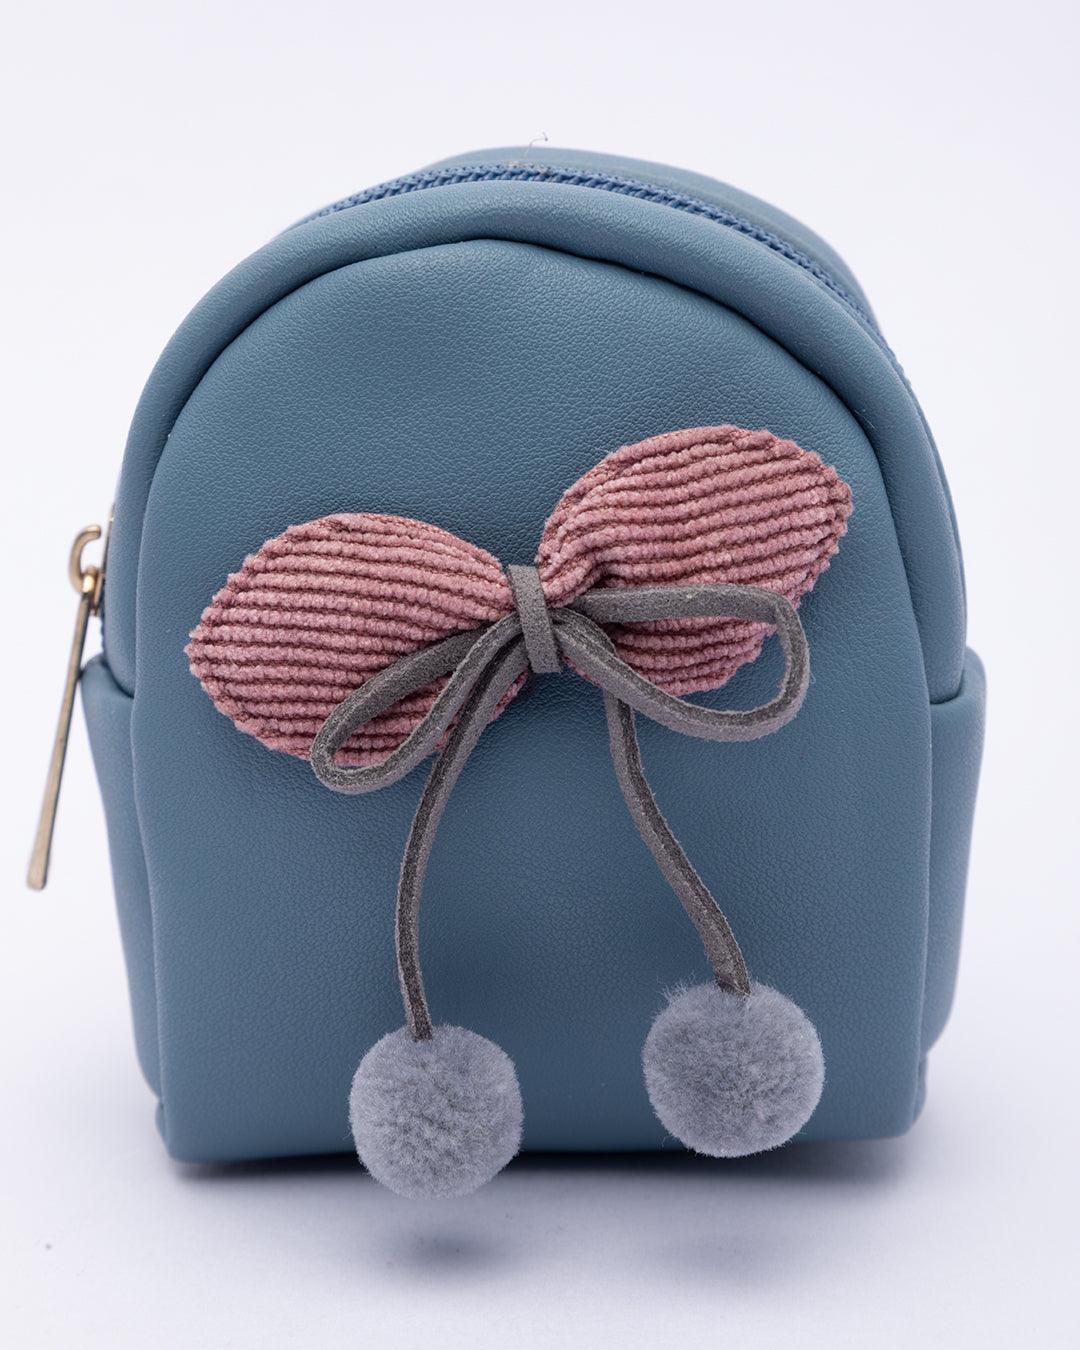 BD Bag Collection - Women Short Tassel Wallet Soft Small Coin Purse Card  Holder Price: 450 Taka Height : 10.5cm/4.13 inch Width : 2.5cm/0.98 inch  Length : 8.5cm/3.34 inch Material : PU